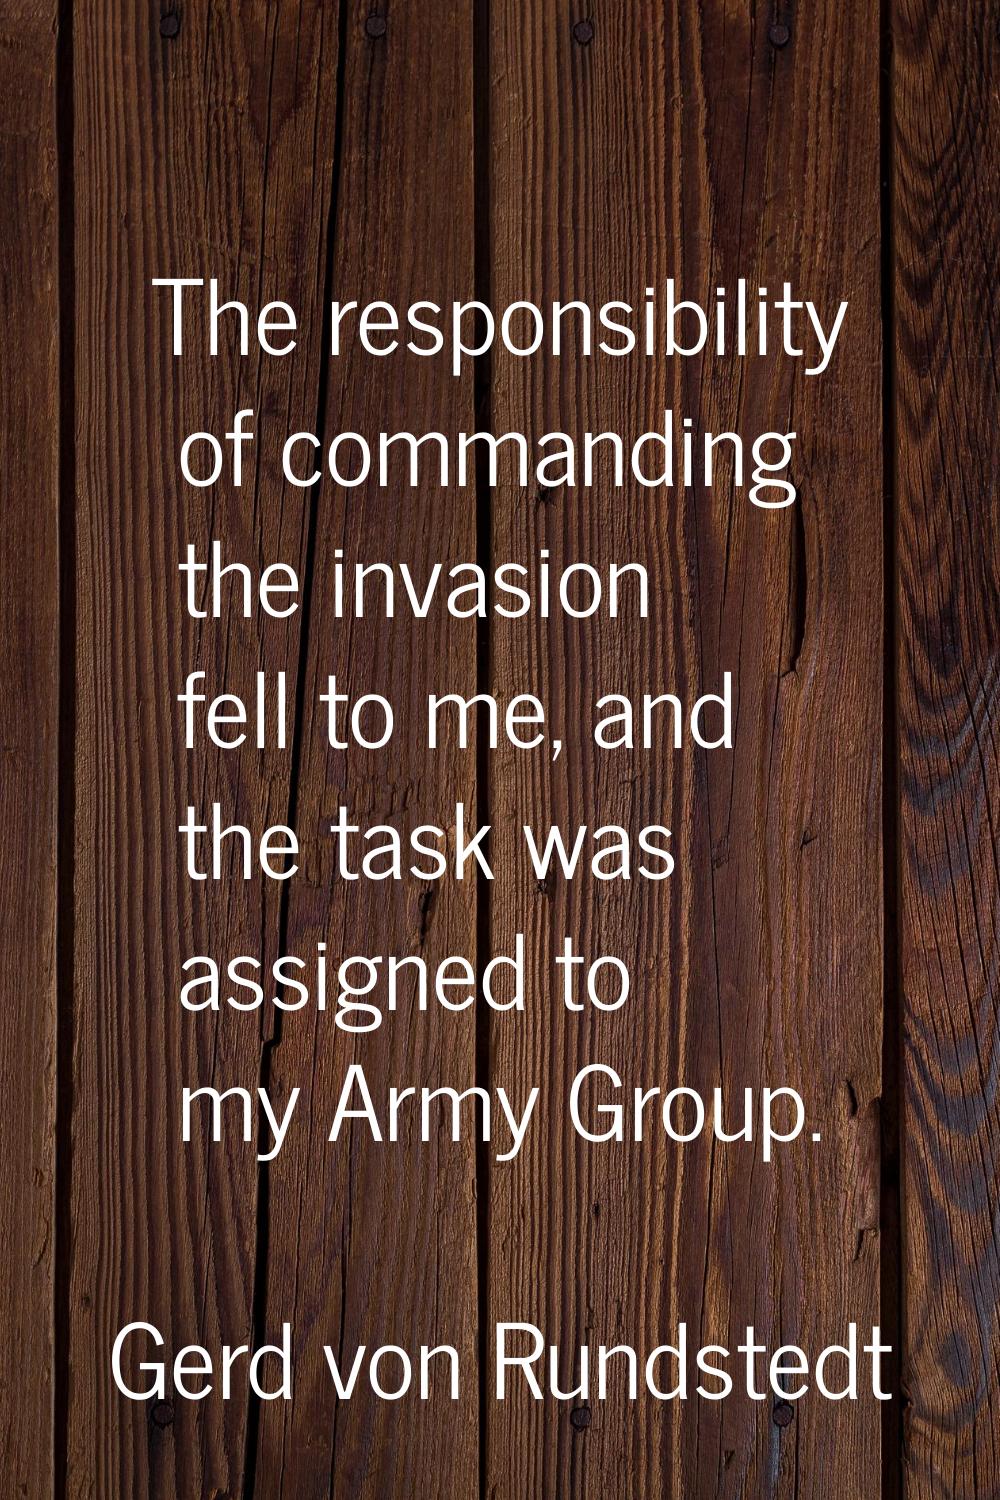 The responsibility of commanding the invasion fell to me, and the task was assigned to my Army Grou